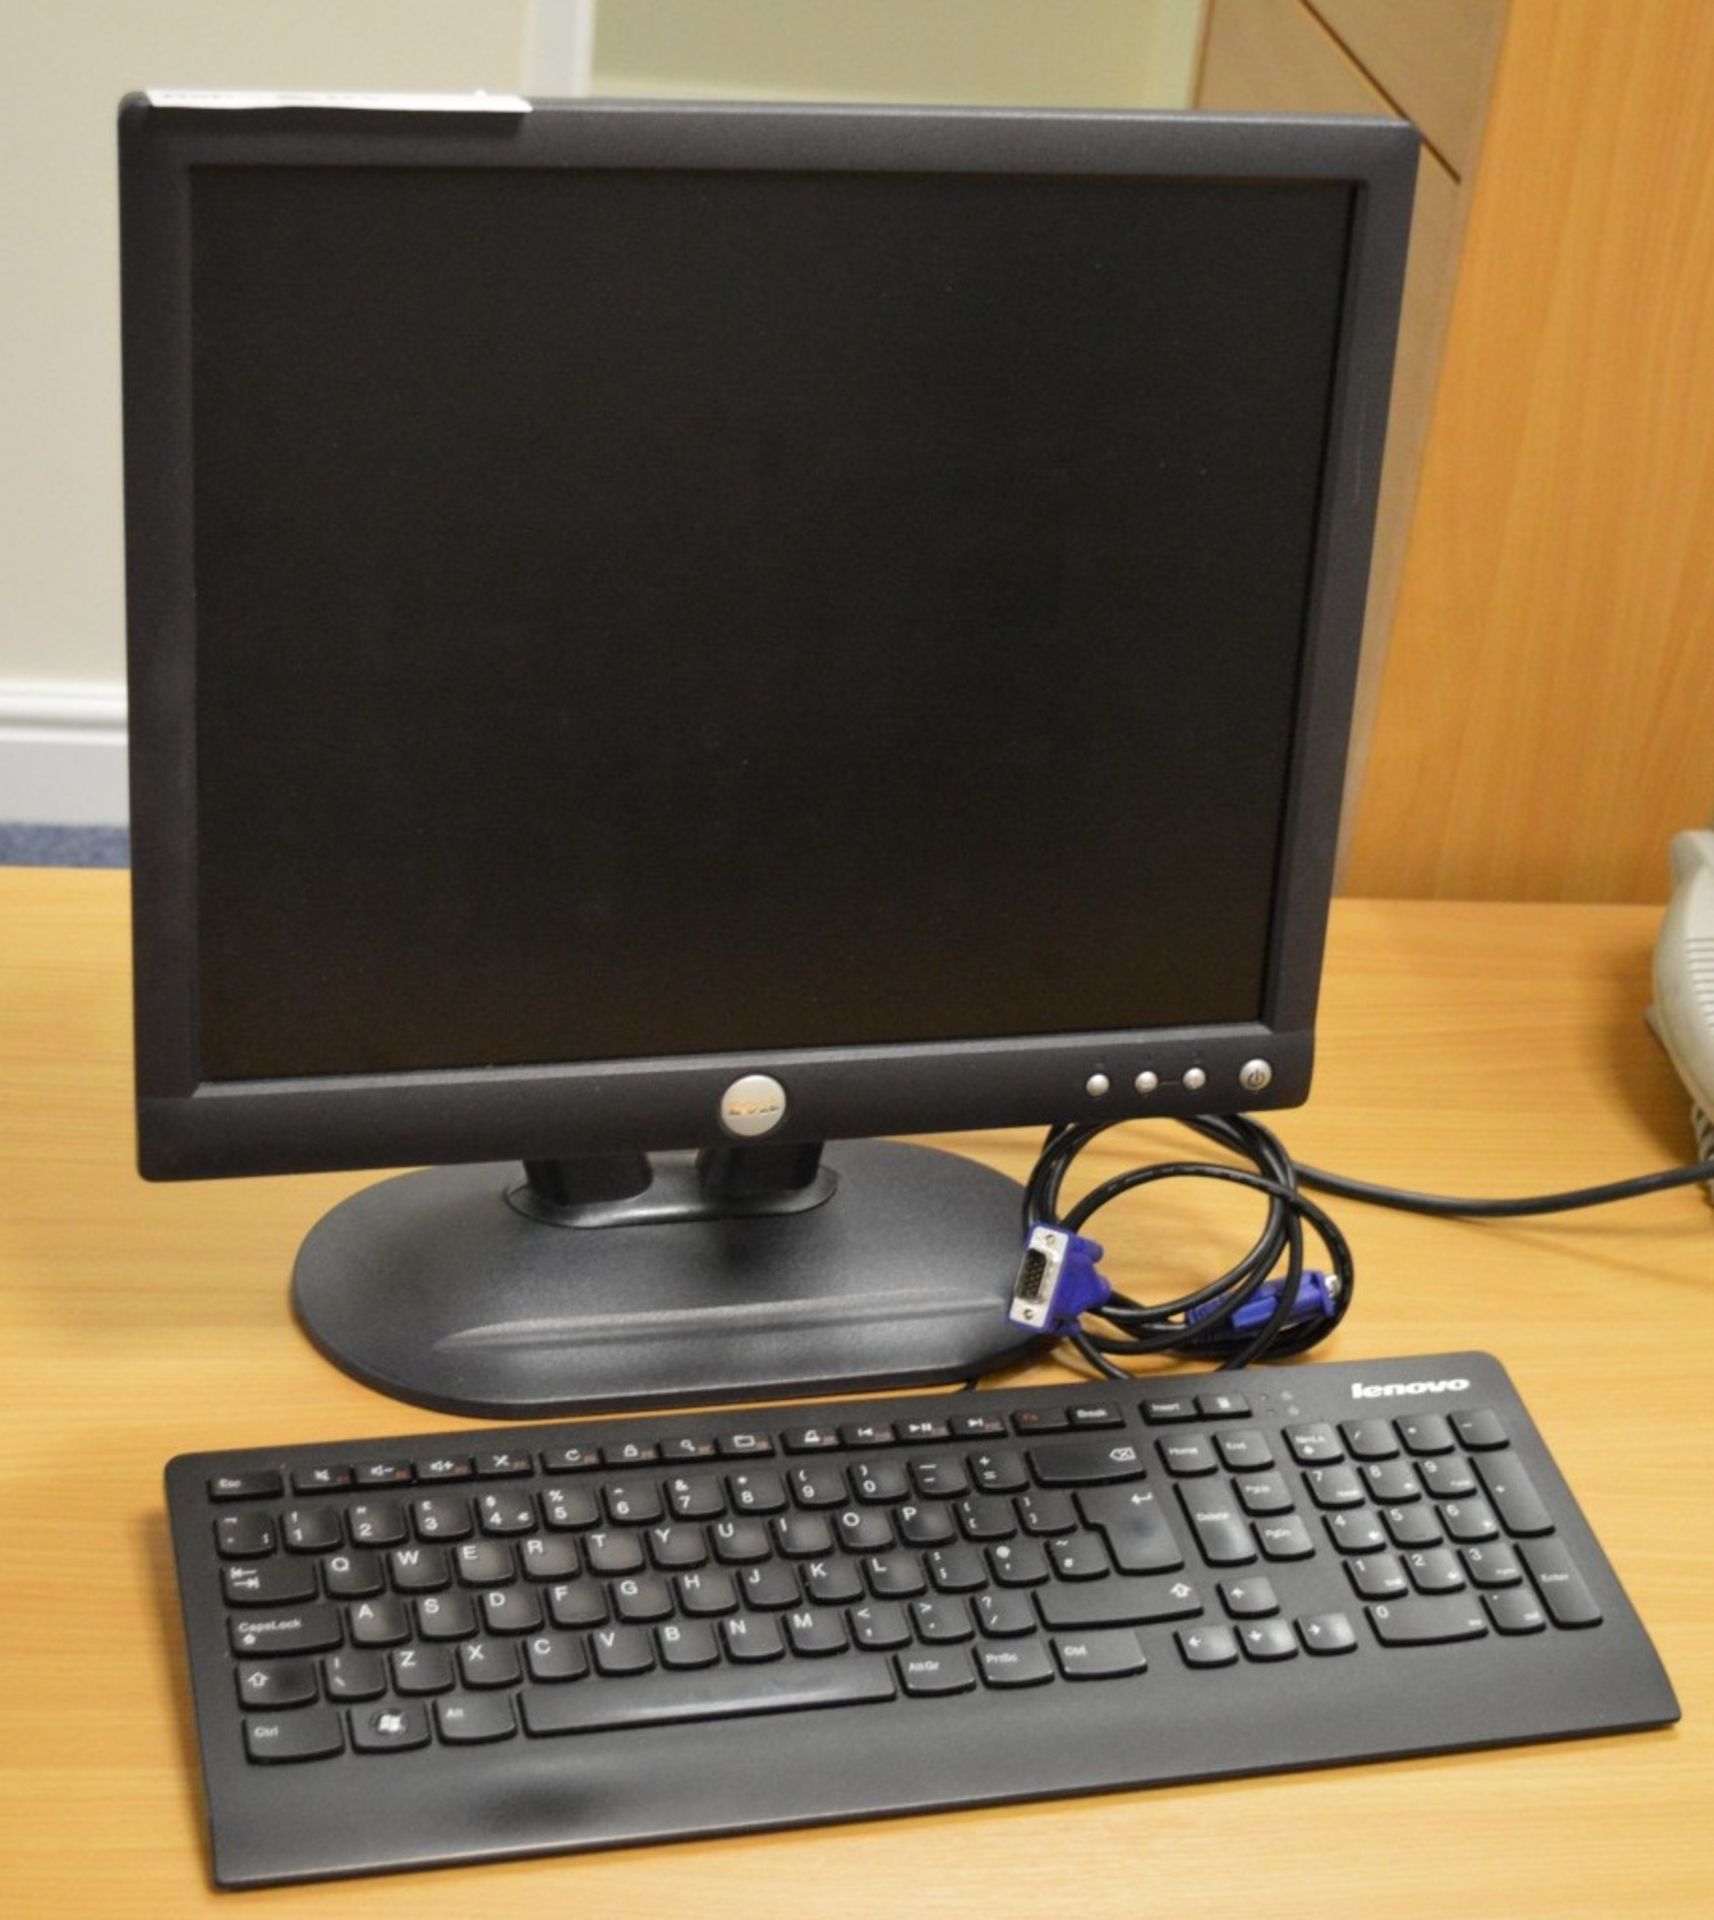 1 x Dell 17 Inch Flatscreen Monitor With Leads, Keyboard and Mouse - CL300 - Ref S111 - Location: